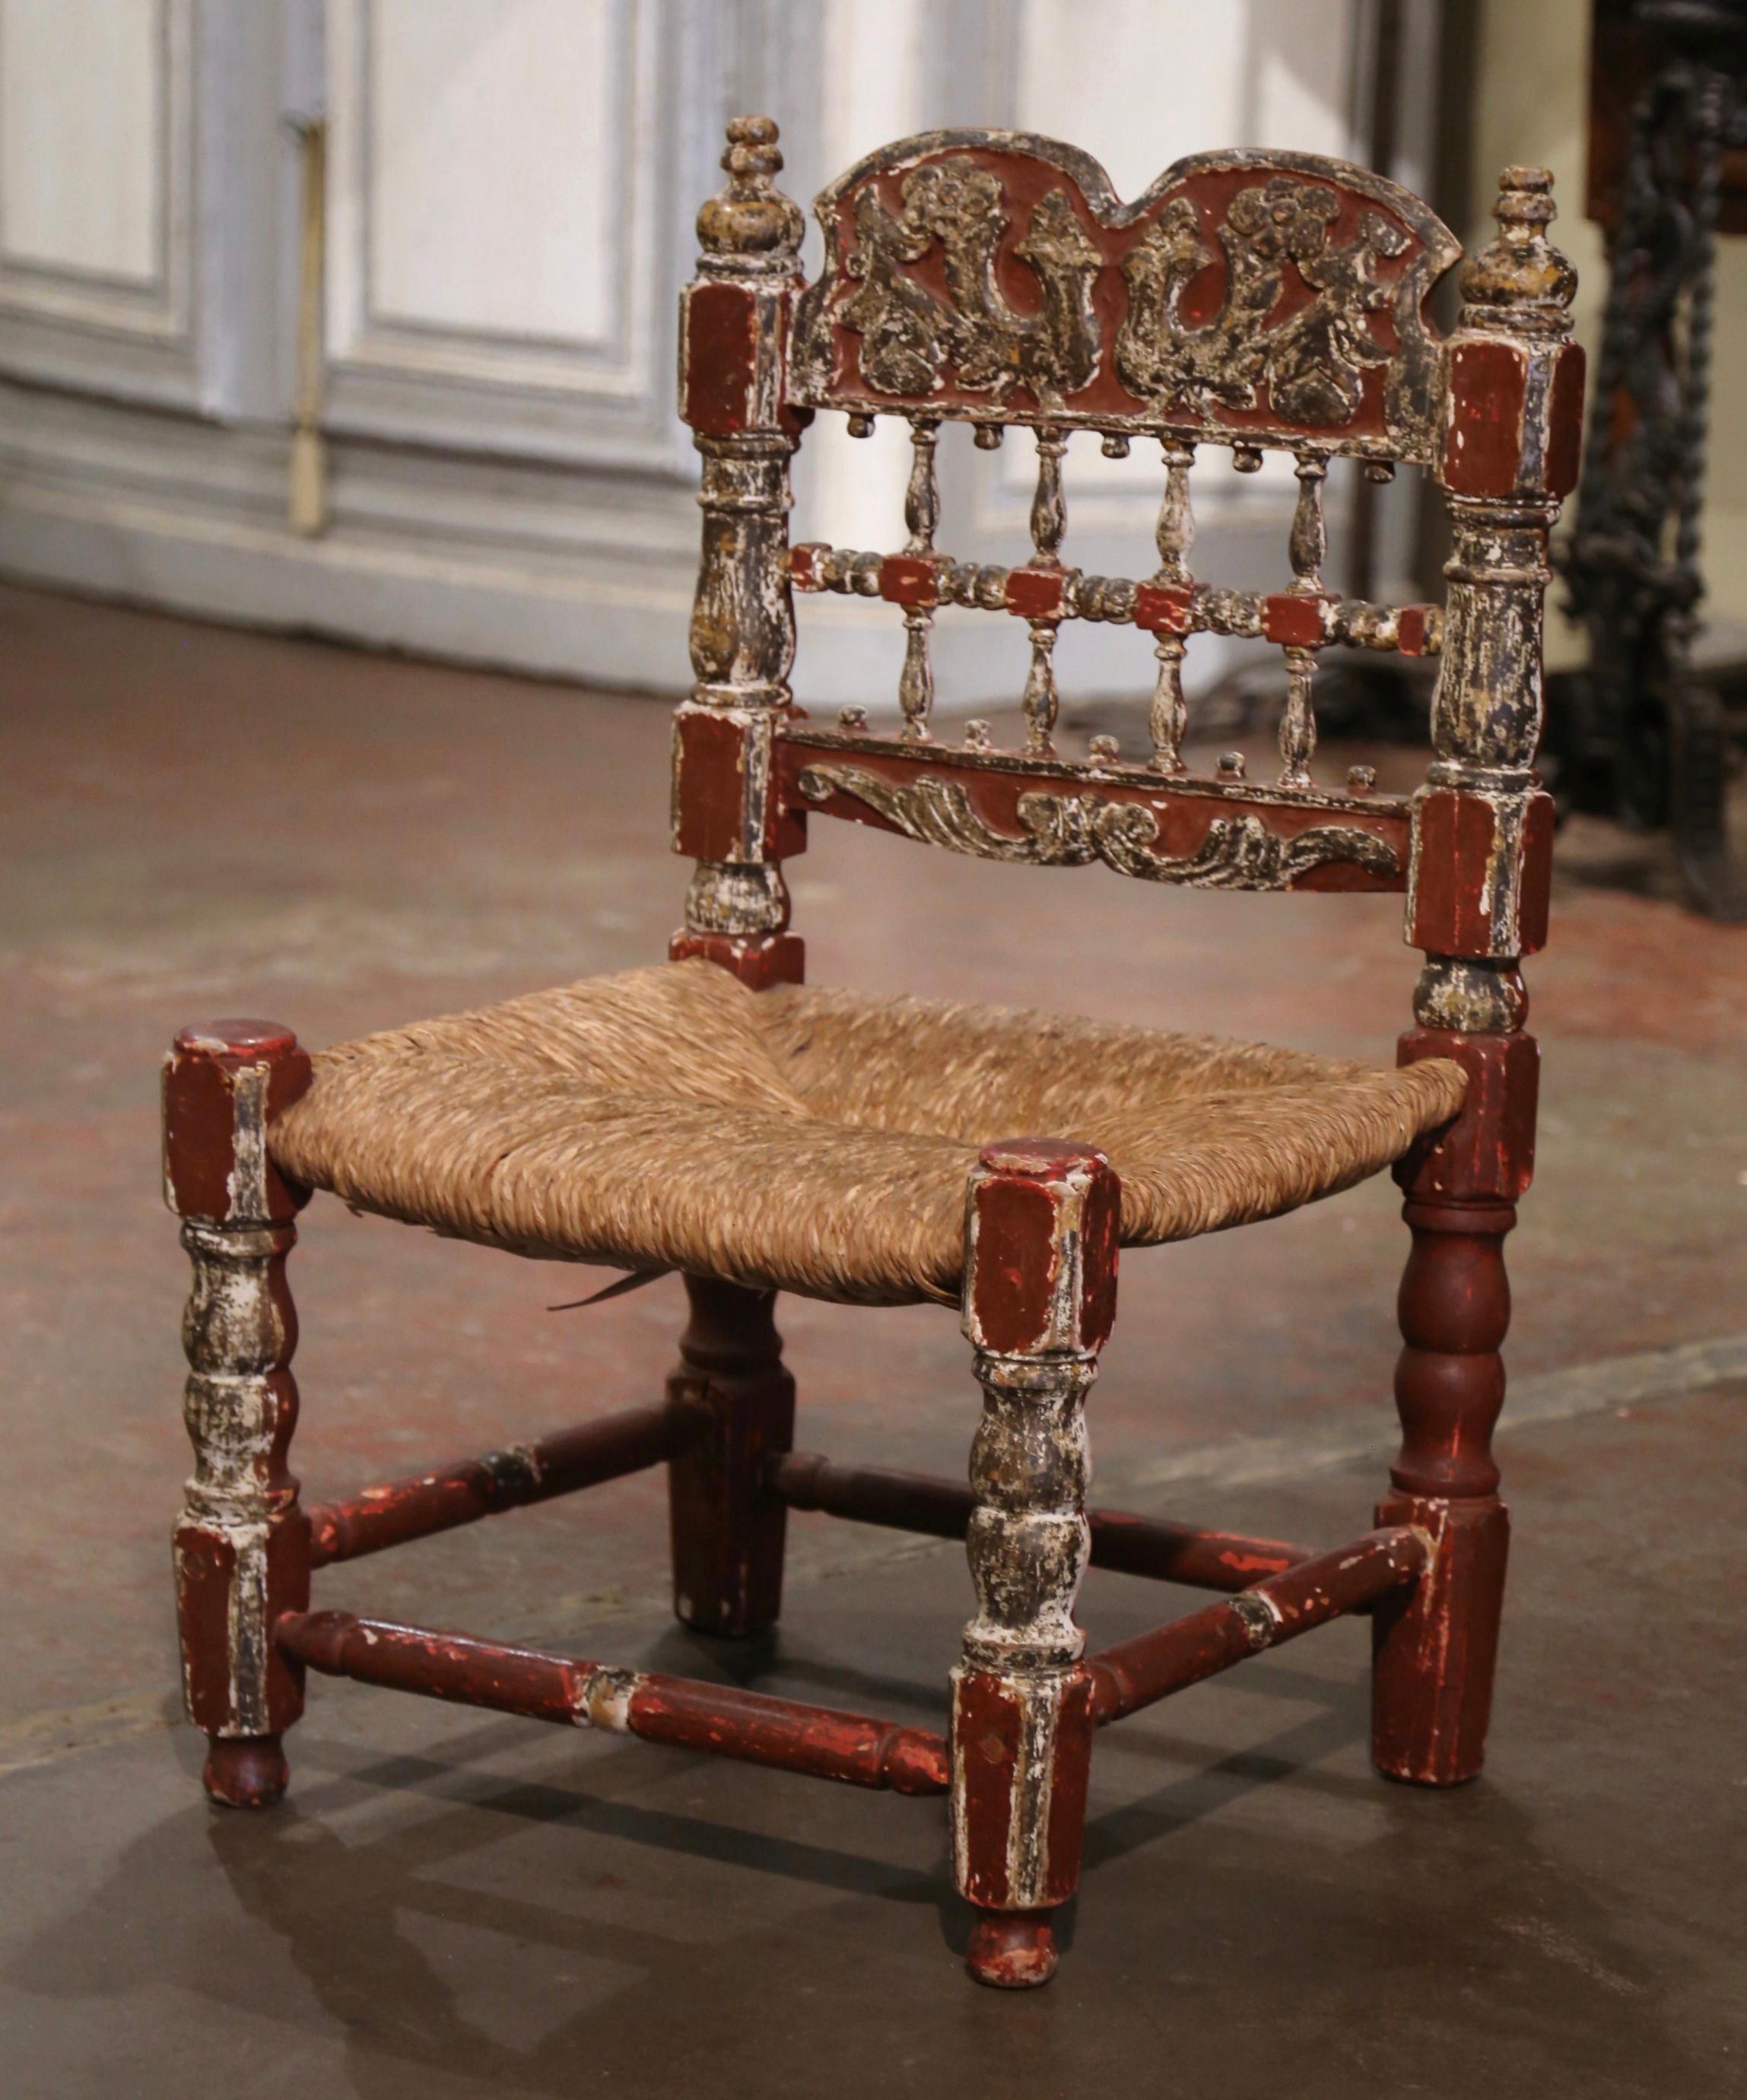 This comfortable carved chair was crafted in Spain circa 1860. Built in oak and beech wood, the chair sits on round turned legs and features an intricate back rest with floral and foliage decor; it is further embellished with round finials at the